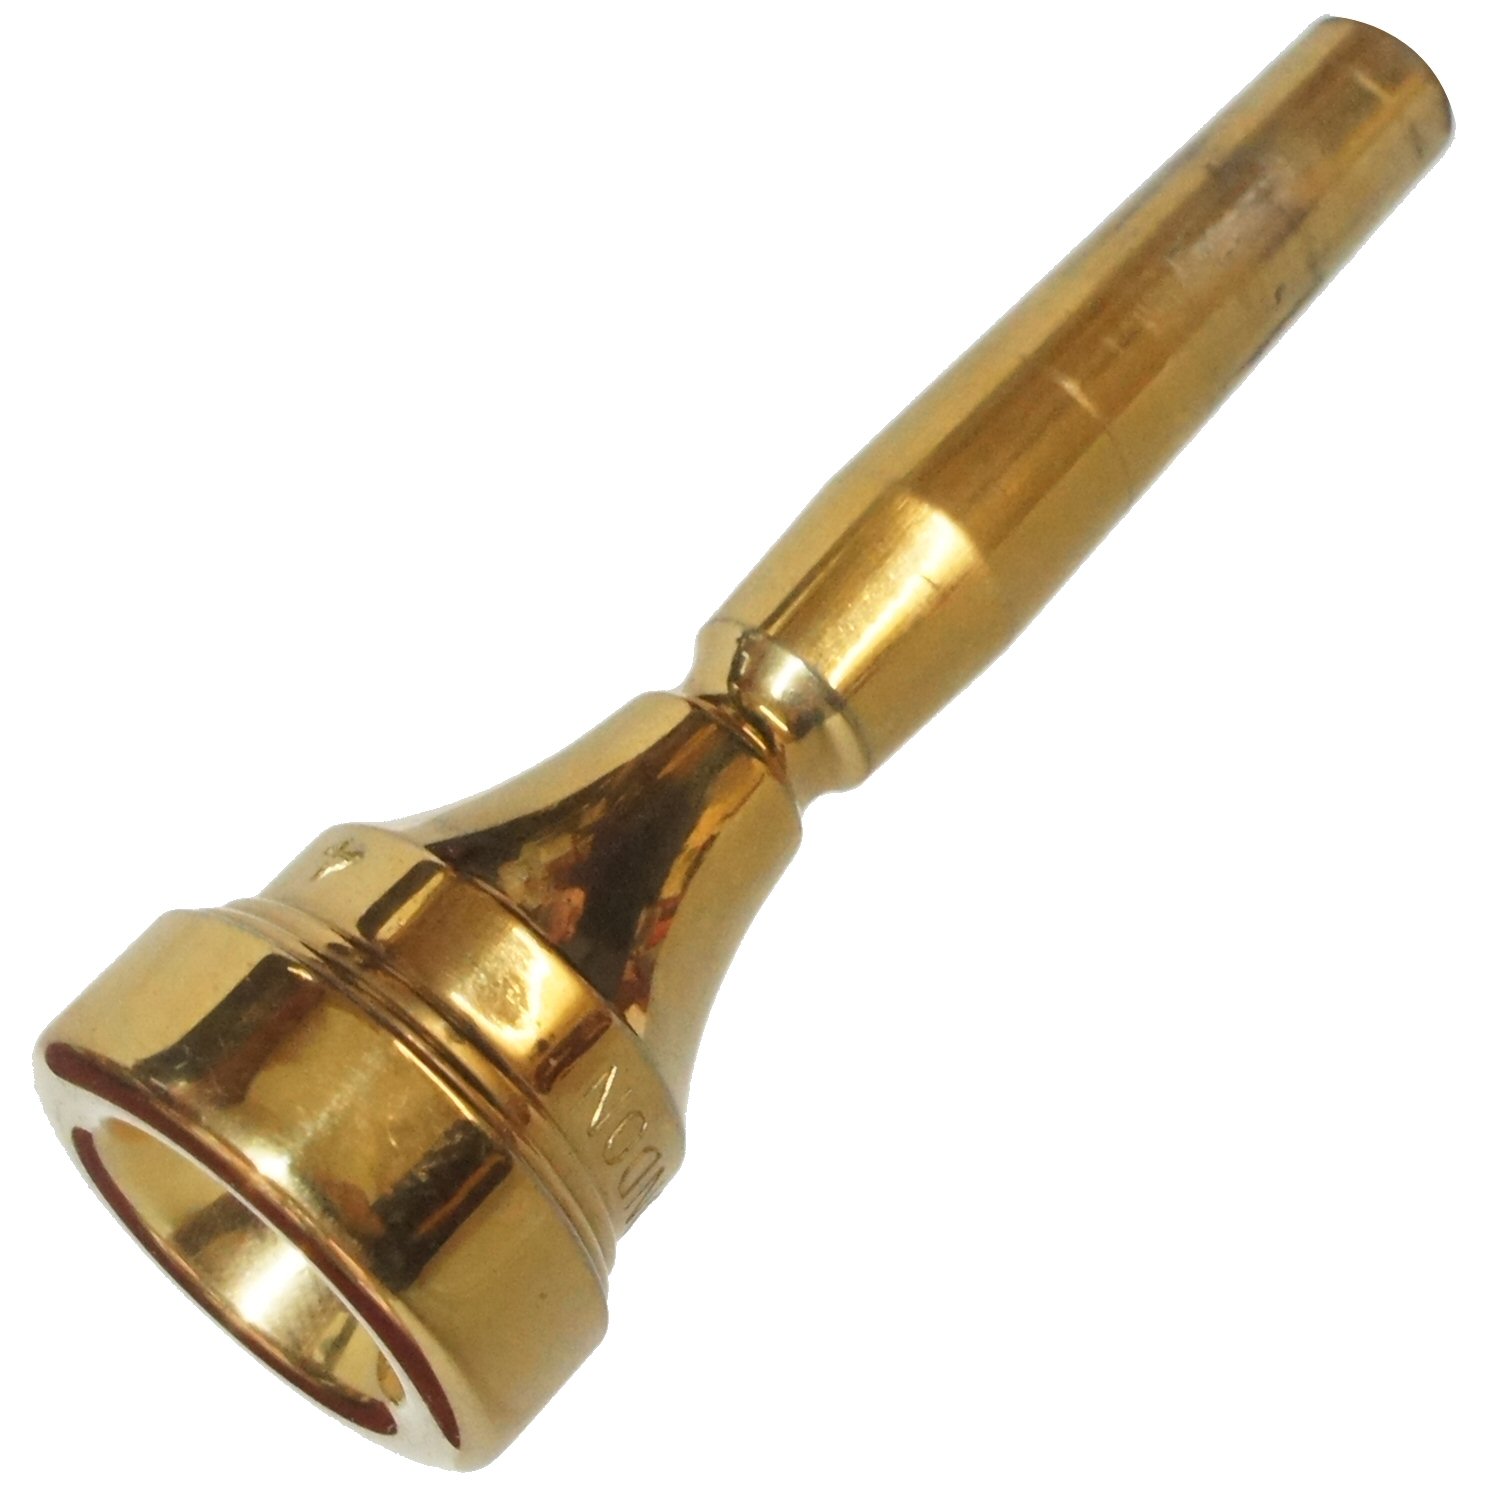 Second Hand Denis Wick number 4 trumpet mouthpiece gold plated